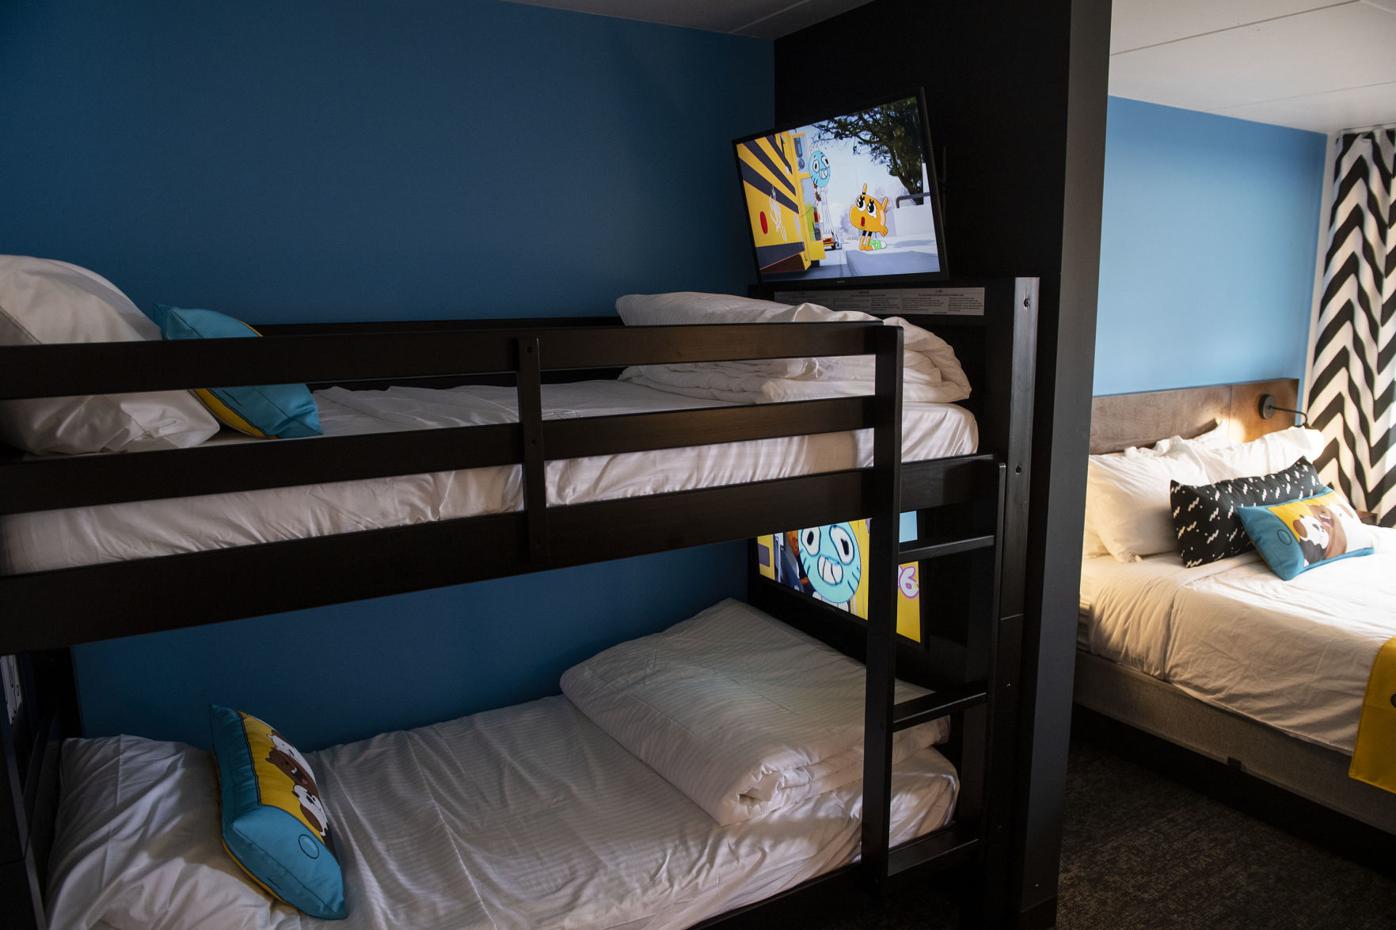 We stayed at the Cartoon Network Hotel before it opens; here’s what it